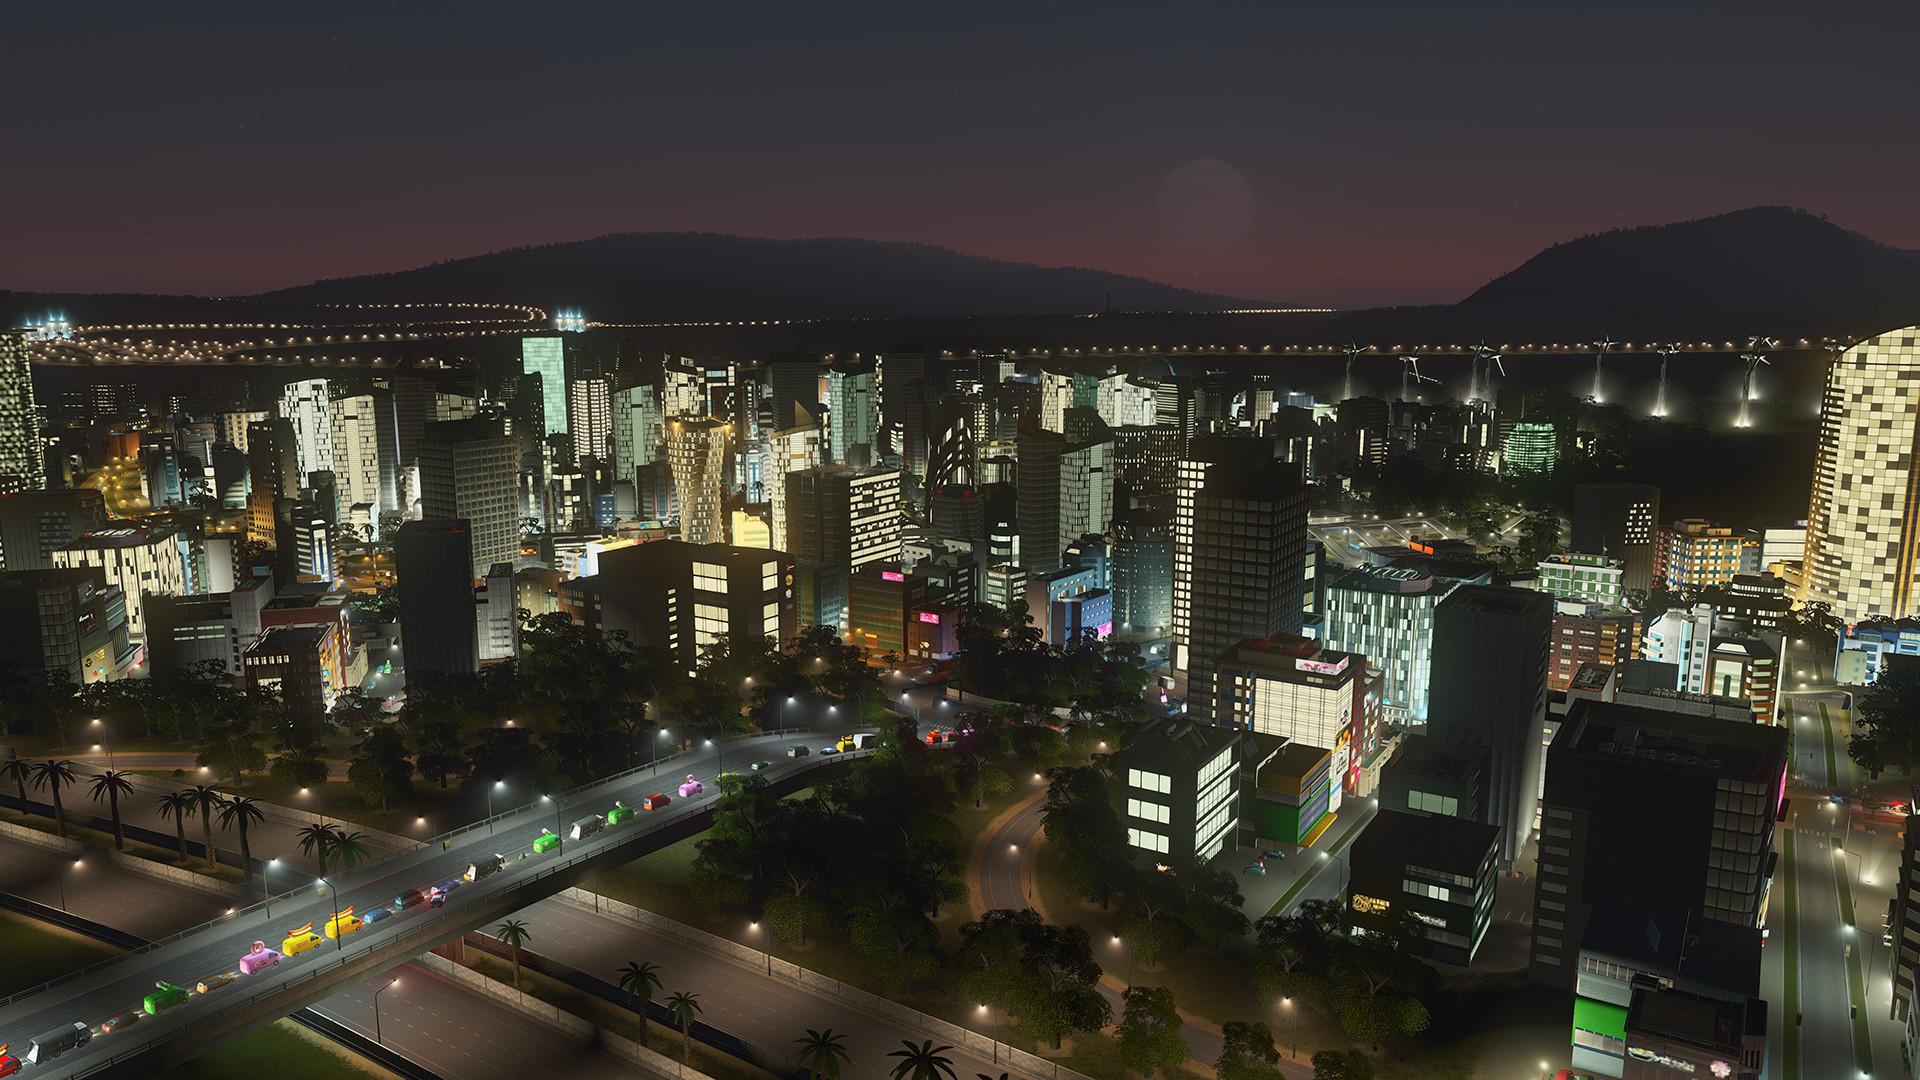 Cities Skylines screenshot of a city at night.